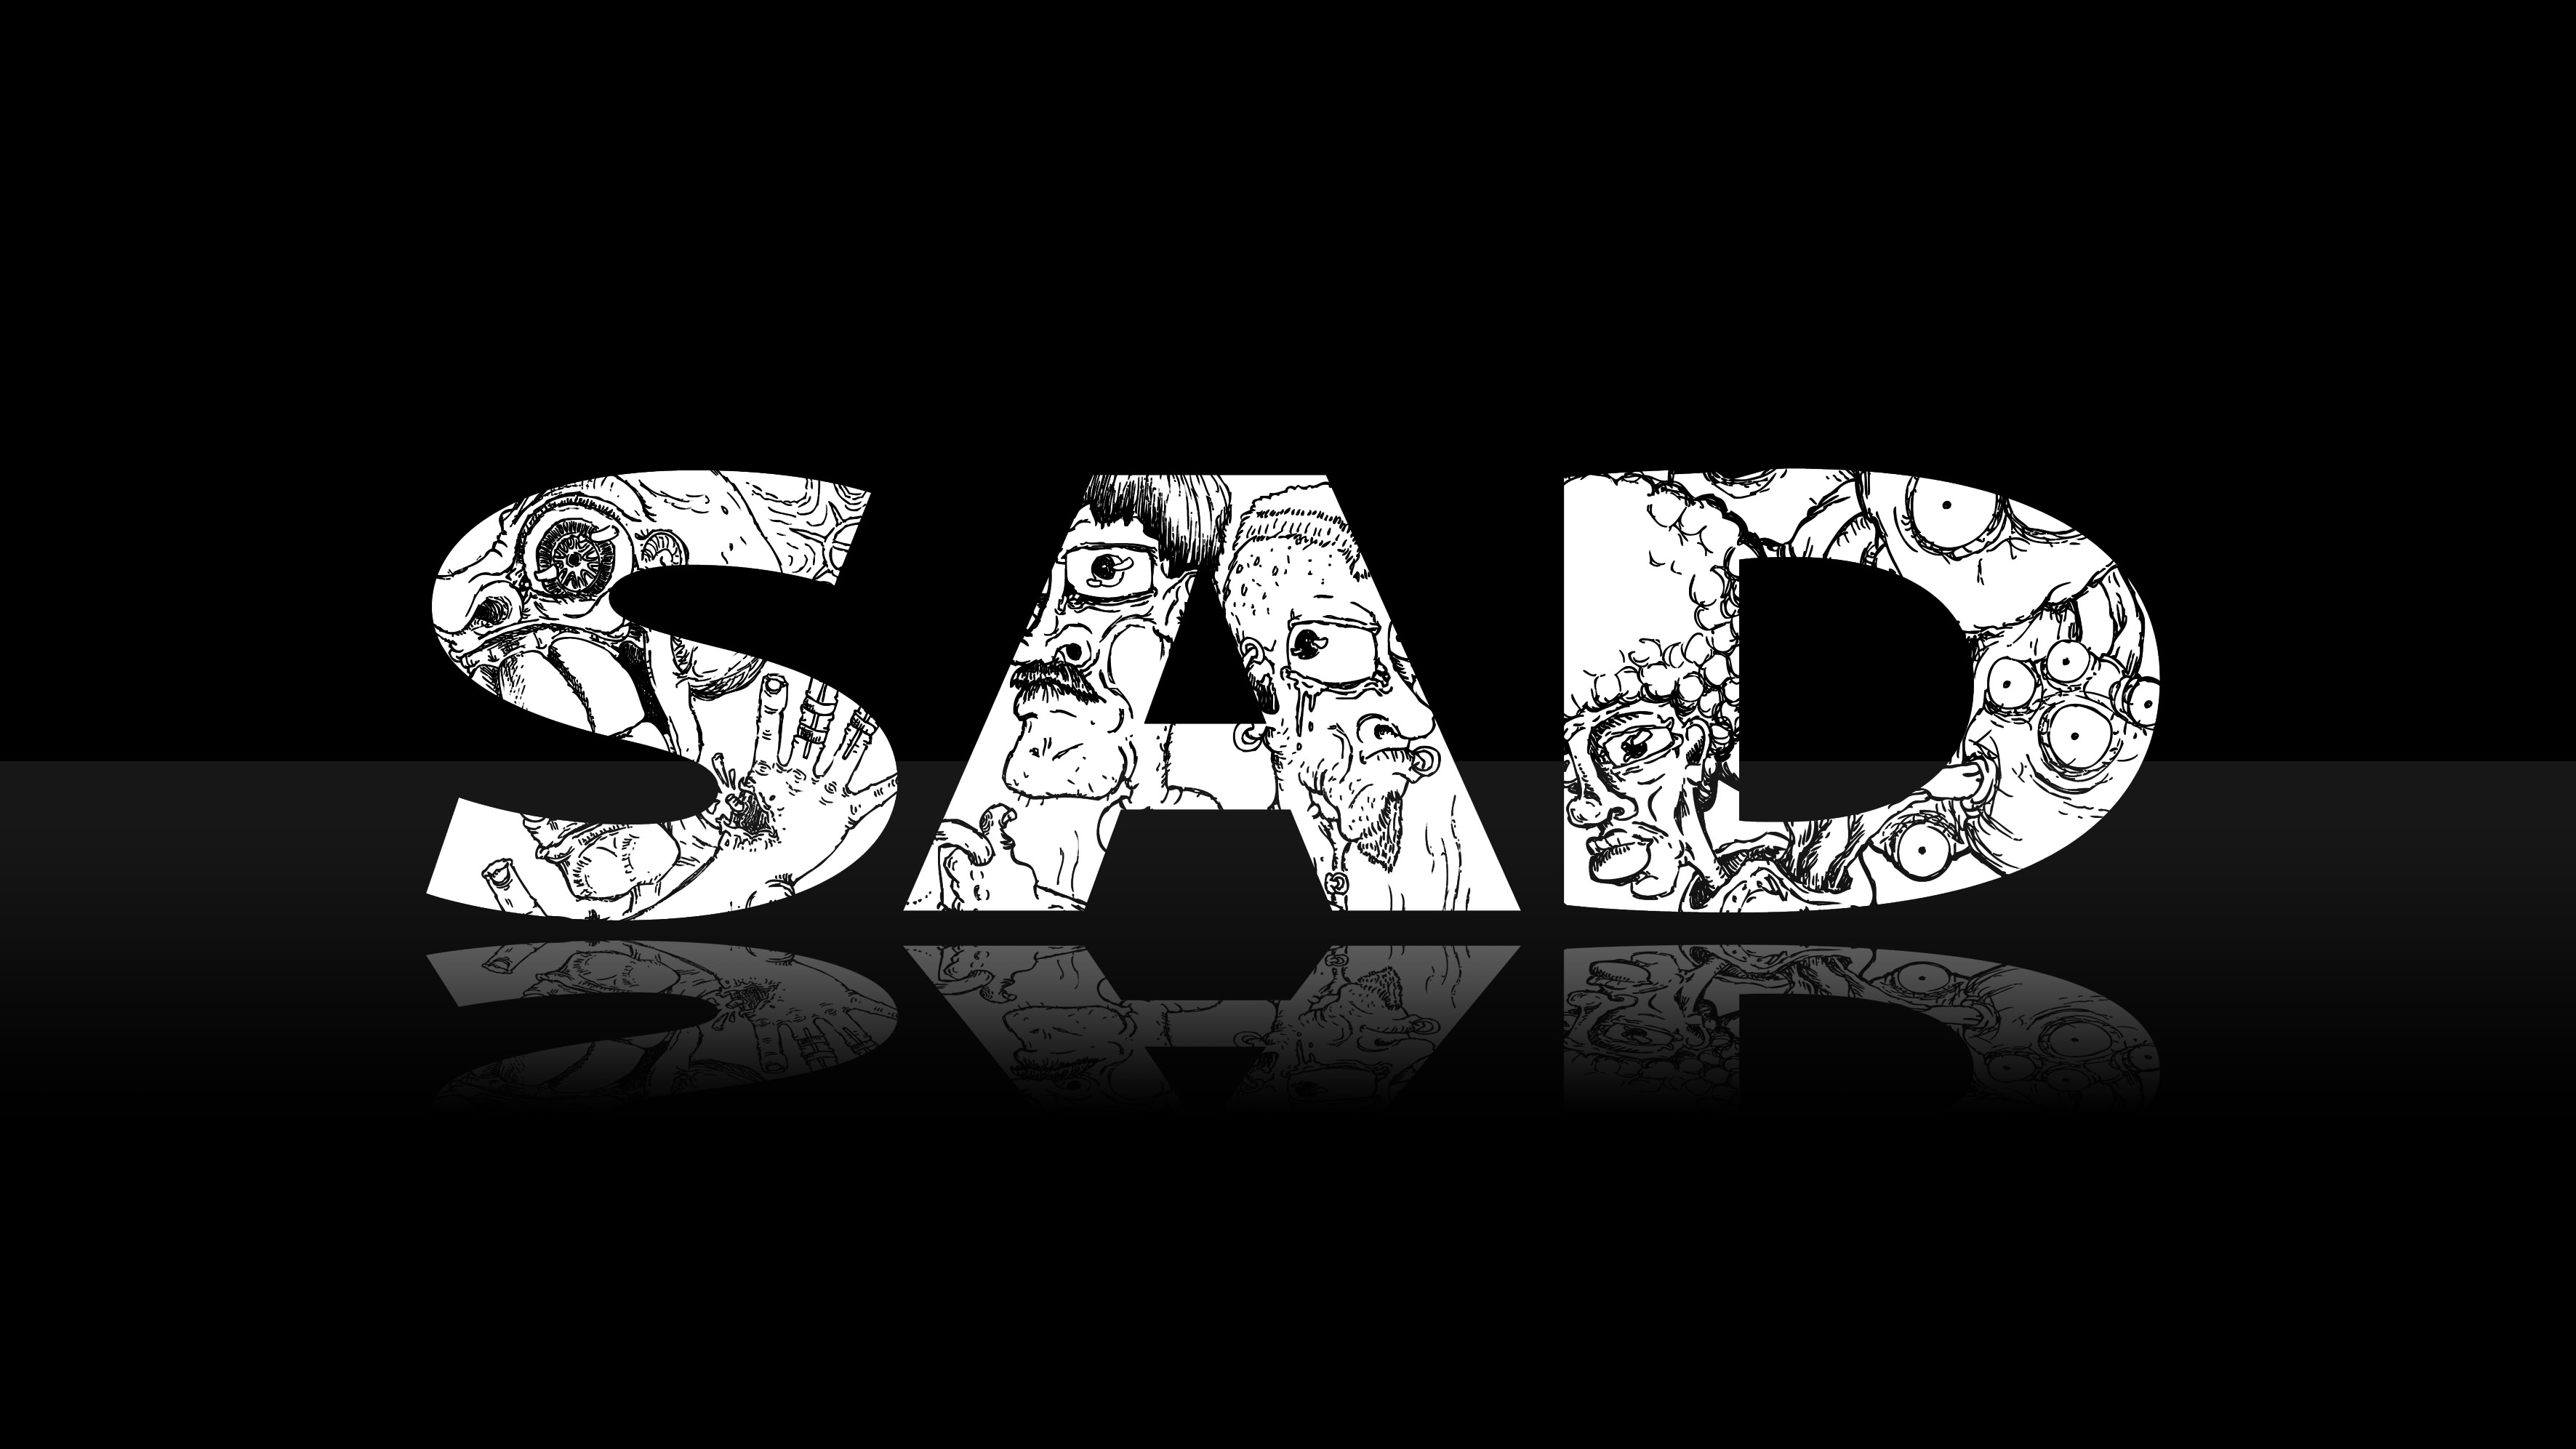 Featured image of post Wallpaper Sad Pc - Free download high resolution sad wallpapers.hd depression desktop, laptop, smartphone background for all.best sad or depression images or sadness pictures.